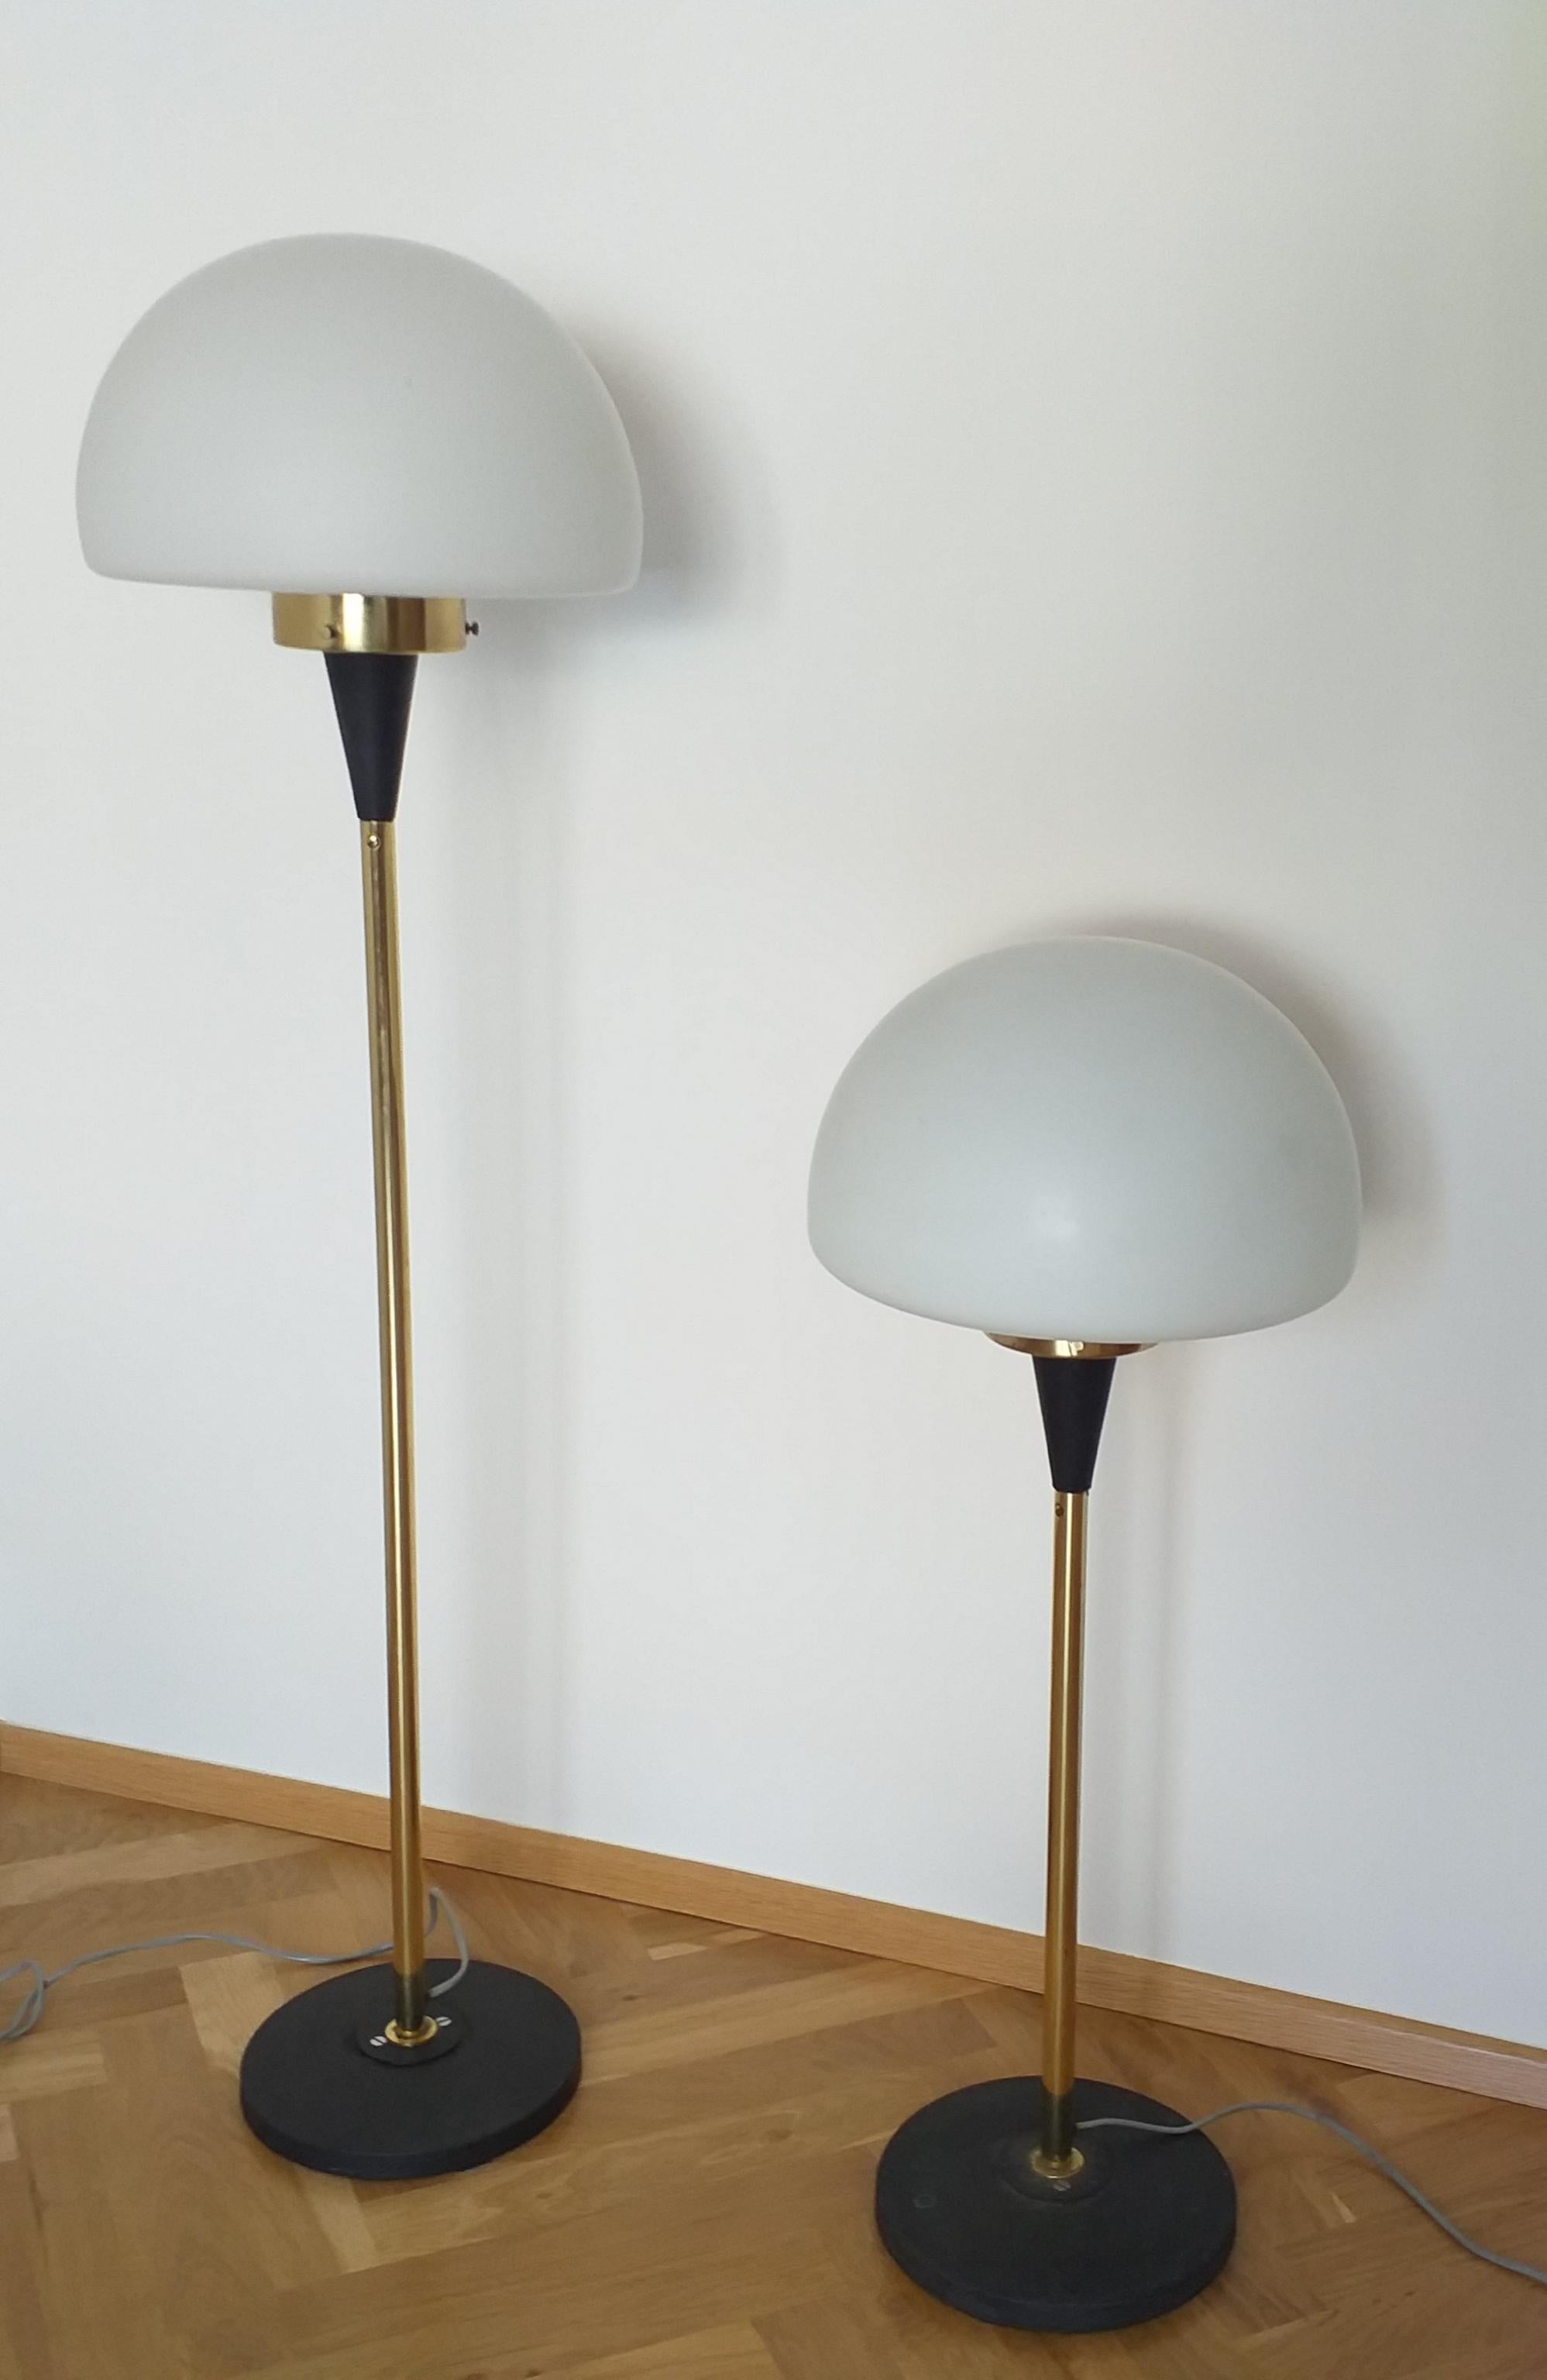 Set of Two Floor Lamps Lidokov Designed by Josef Hurka, 1970s For Sale 3